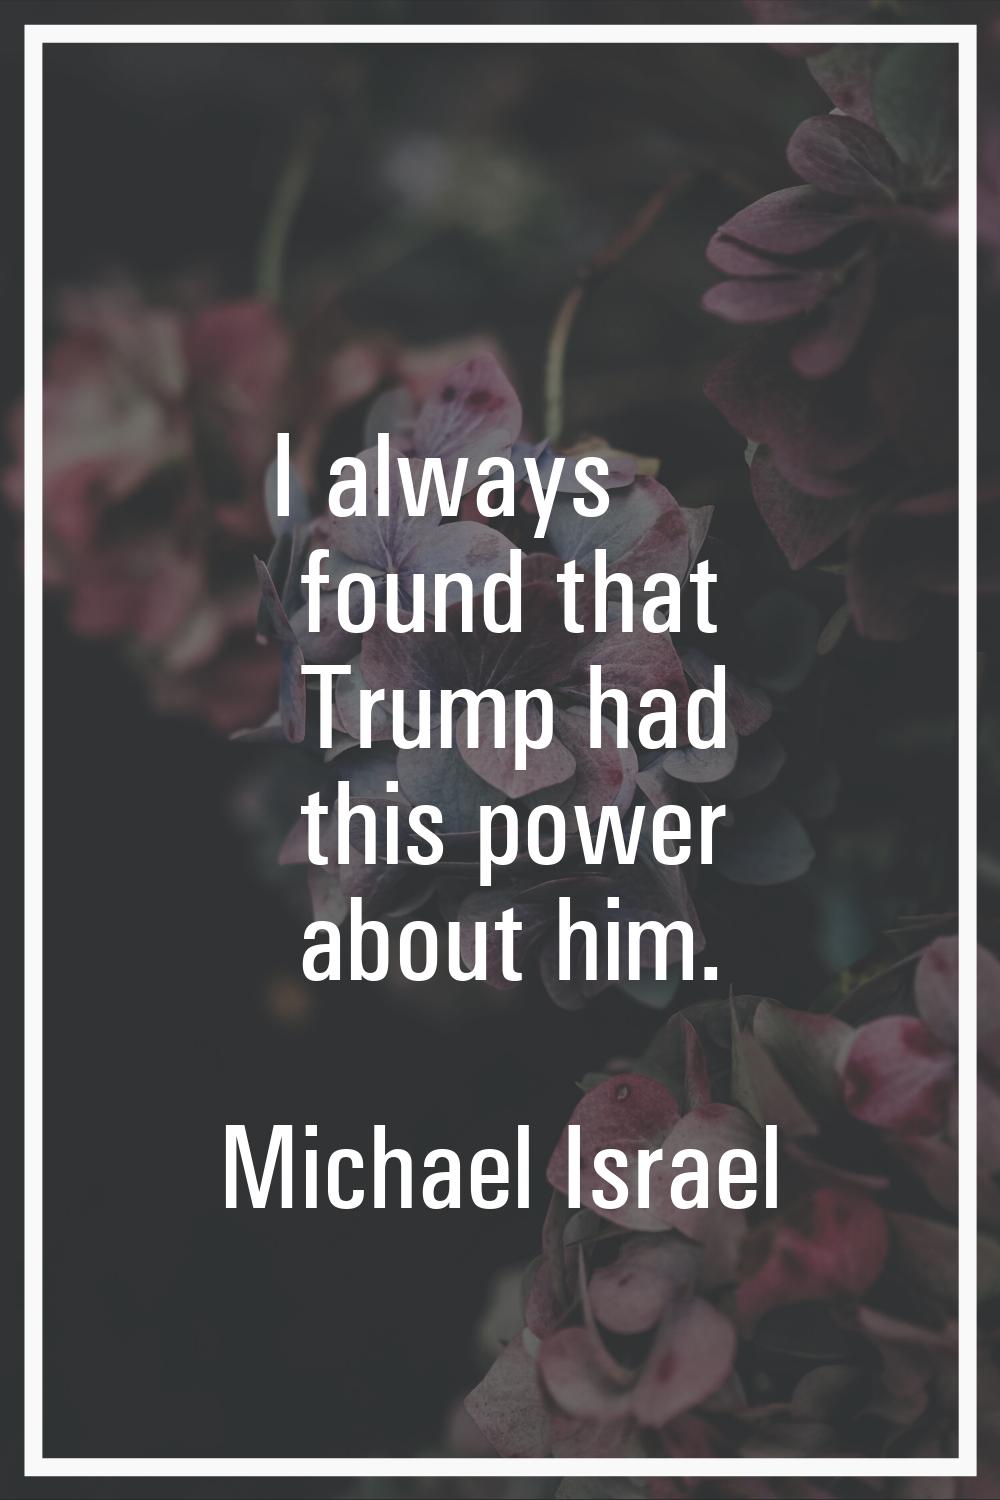 I always found that Trump had this power about him.